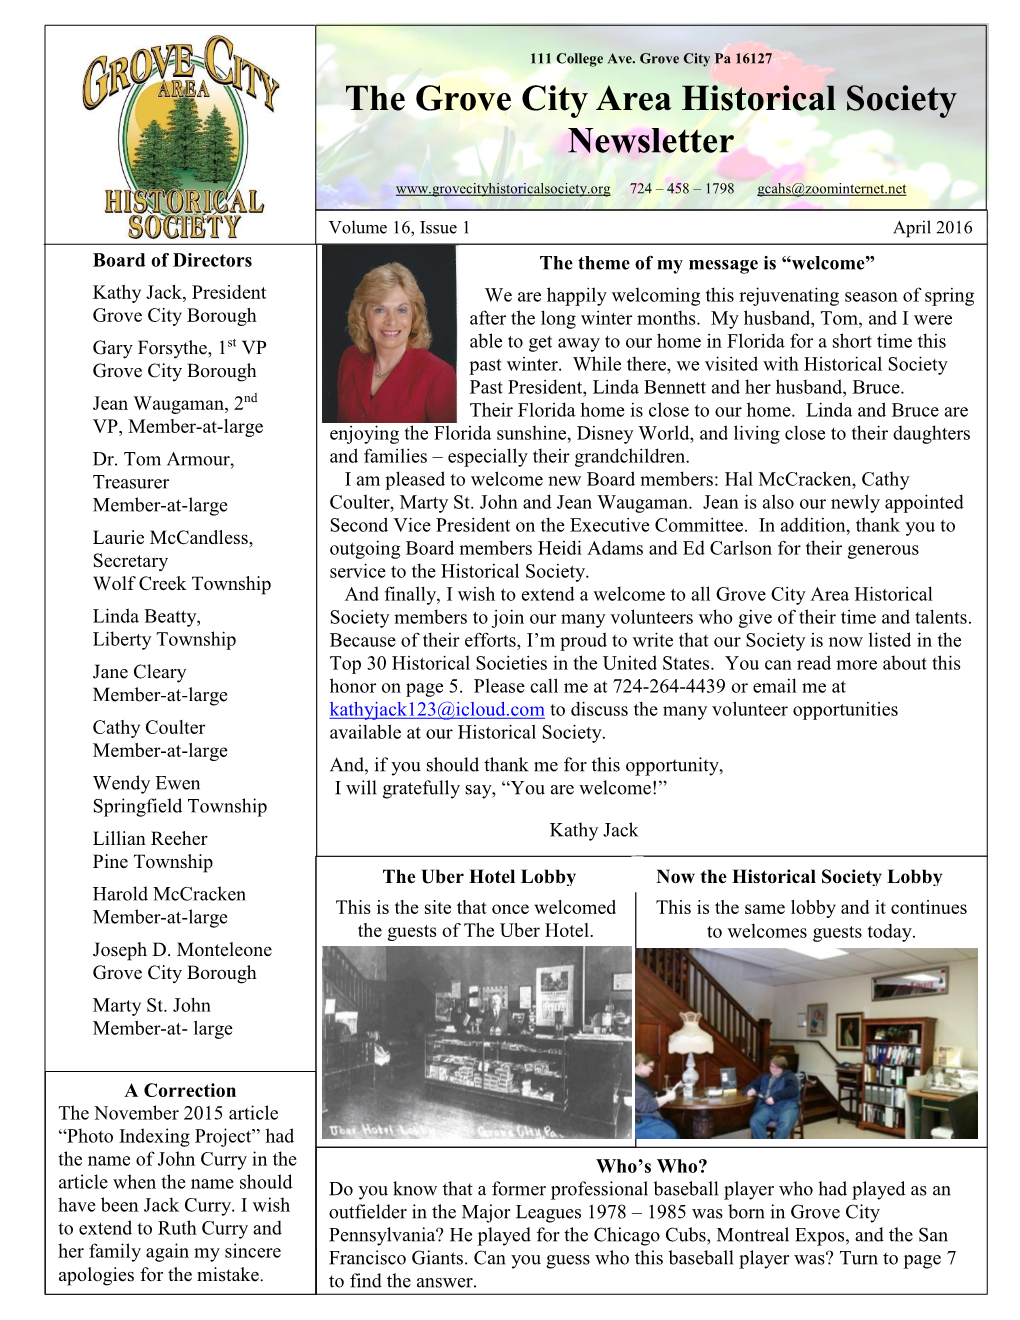 The Grove City Area Historical Society Newsletter